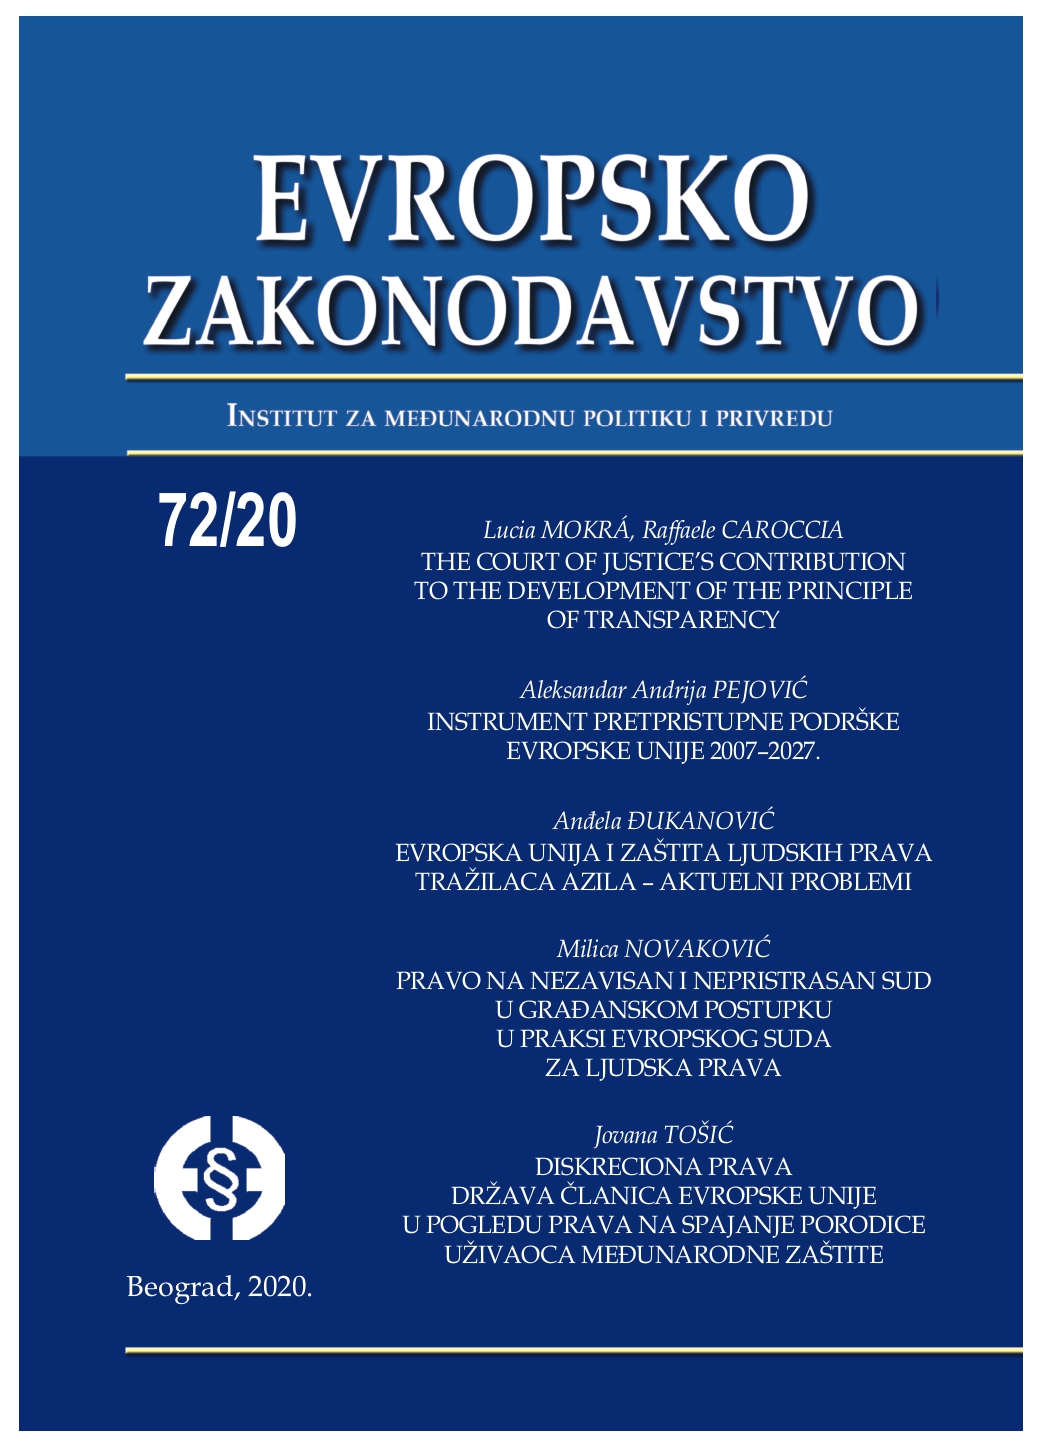 The instrument of pre-accession assistance (IPA) of the European Union 2007-2027 Cover Image